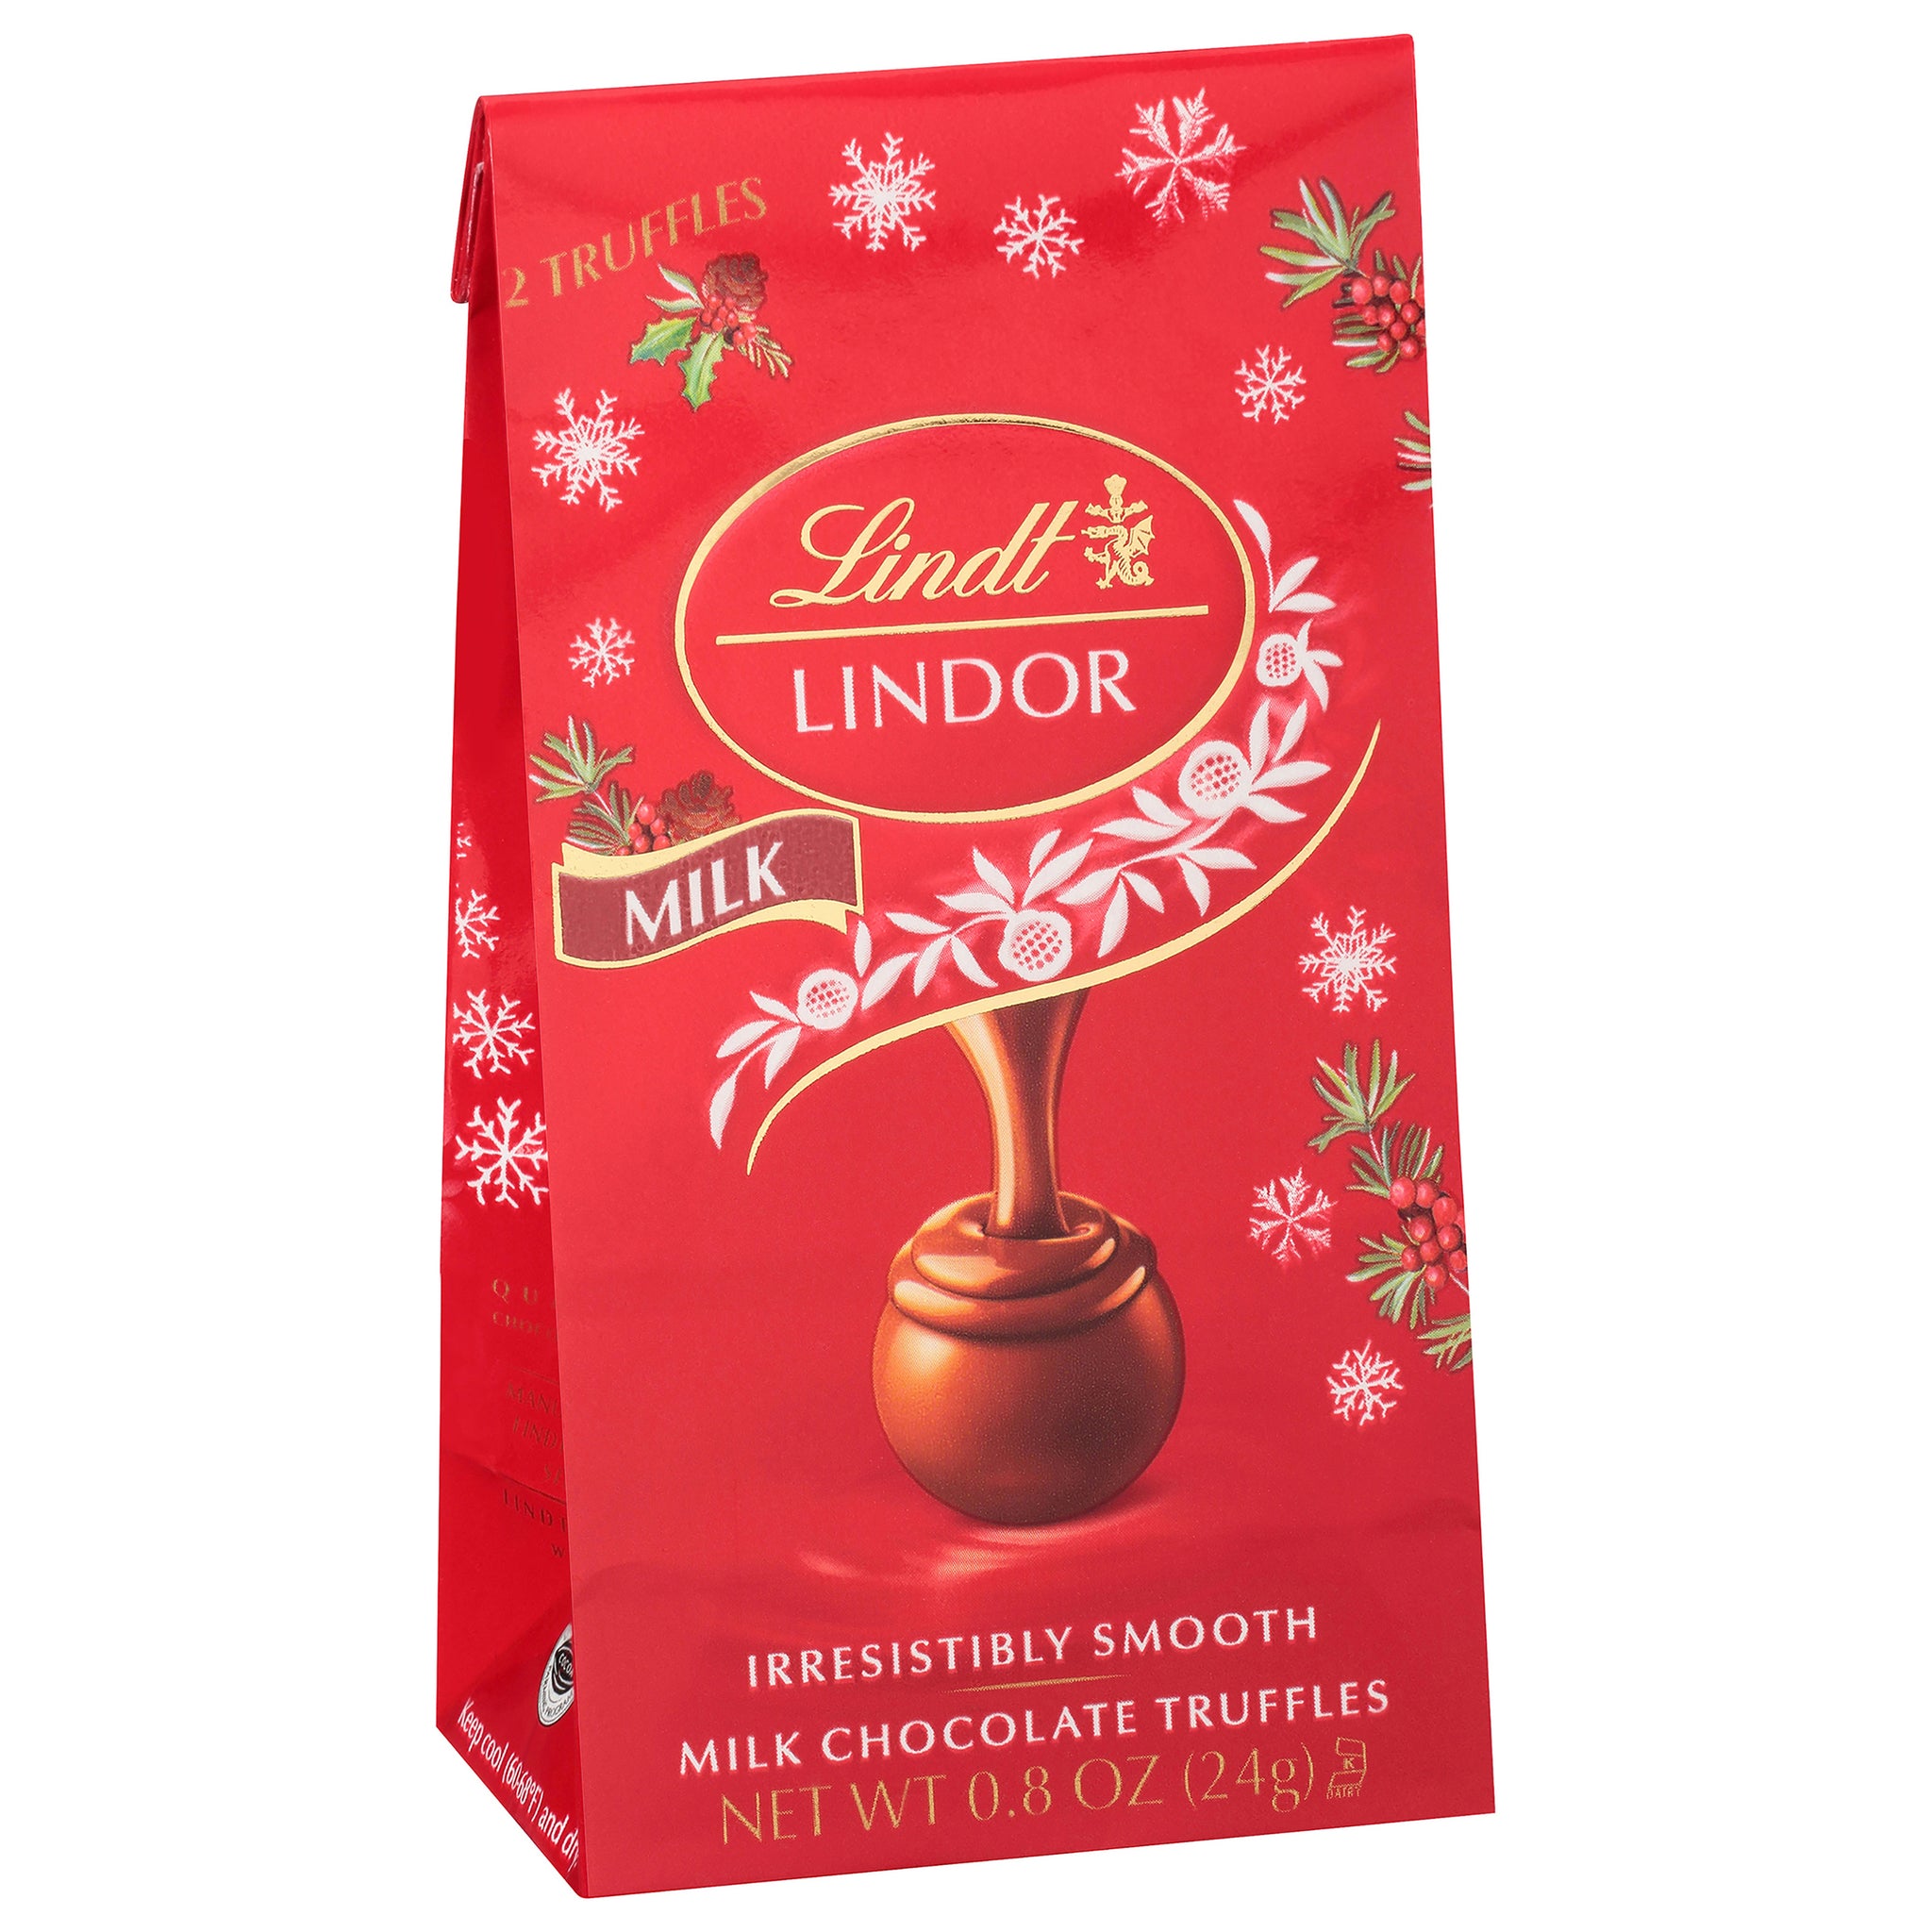 Delicious chocolate lindt With Multiple Fun Flavors 